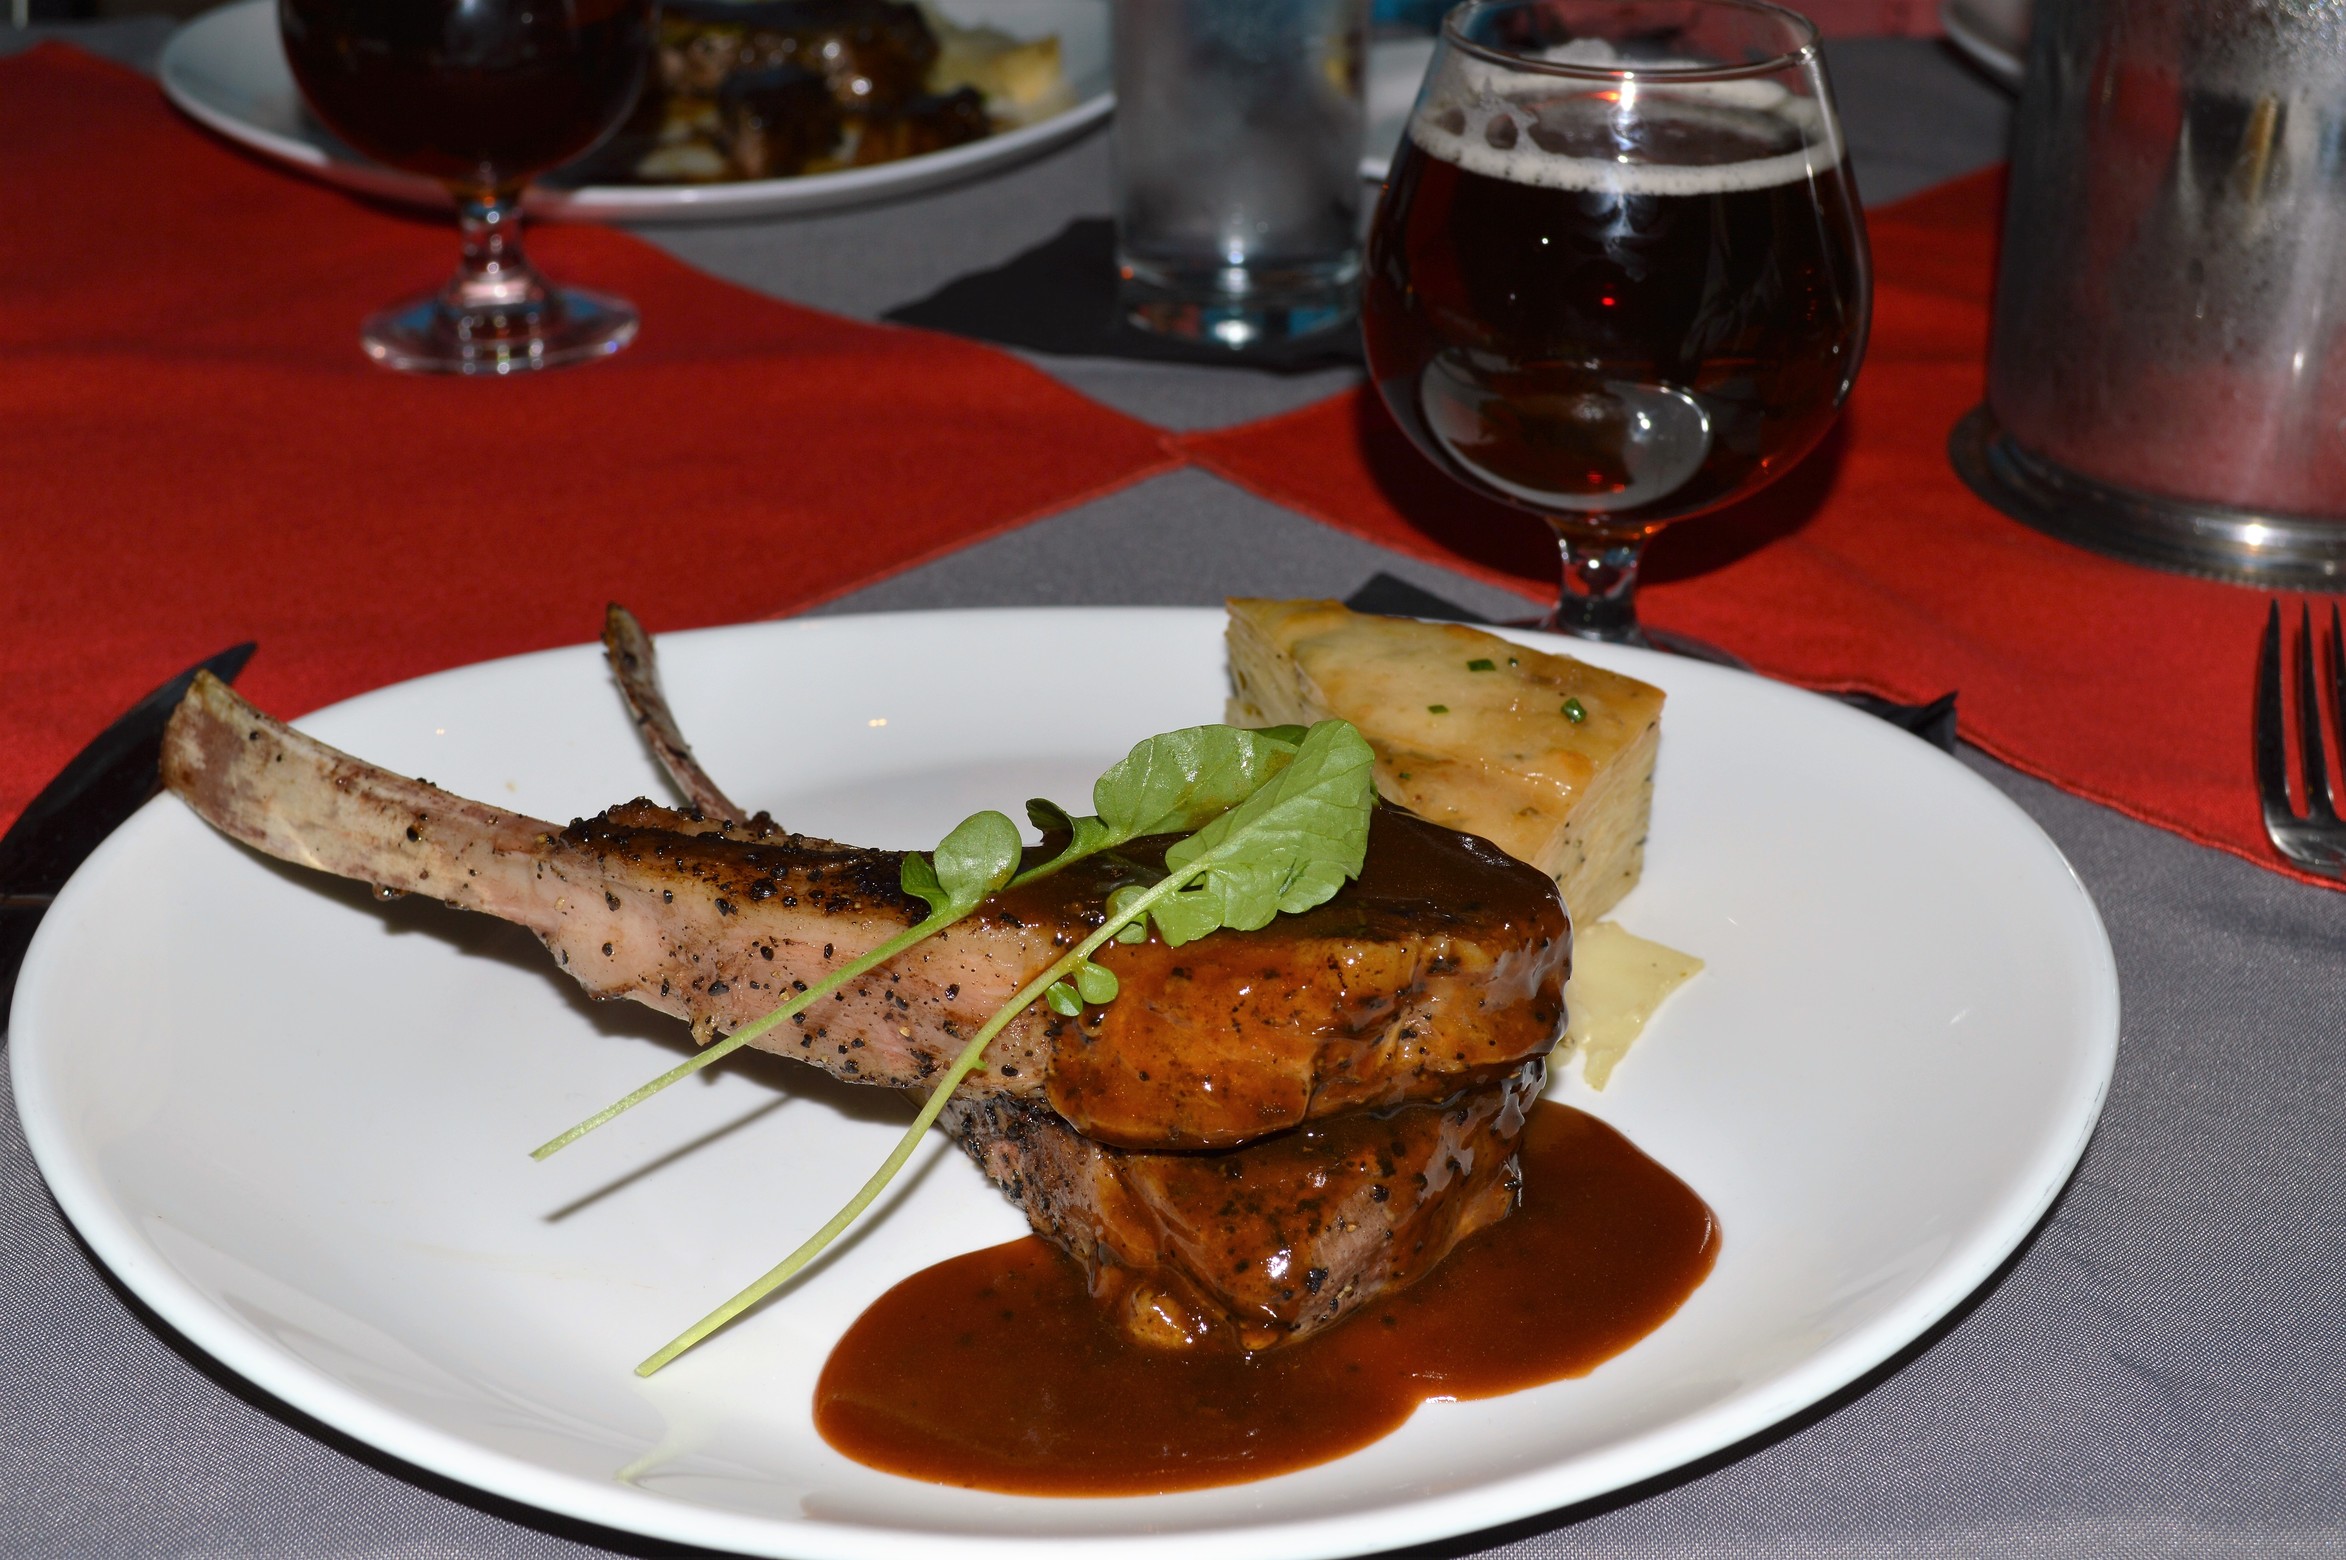 Expresso-encrusted Colorado lamb lollipops, white cheddar potato gratin, and water cress, with a 90 Schilling demi-glace.